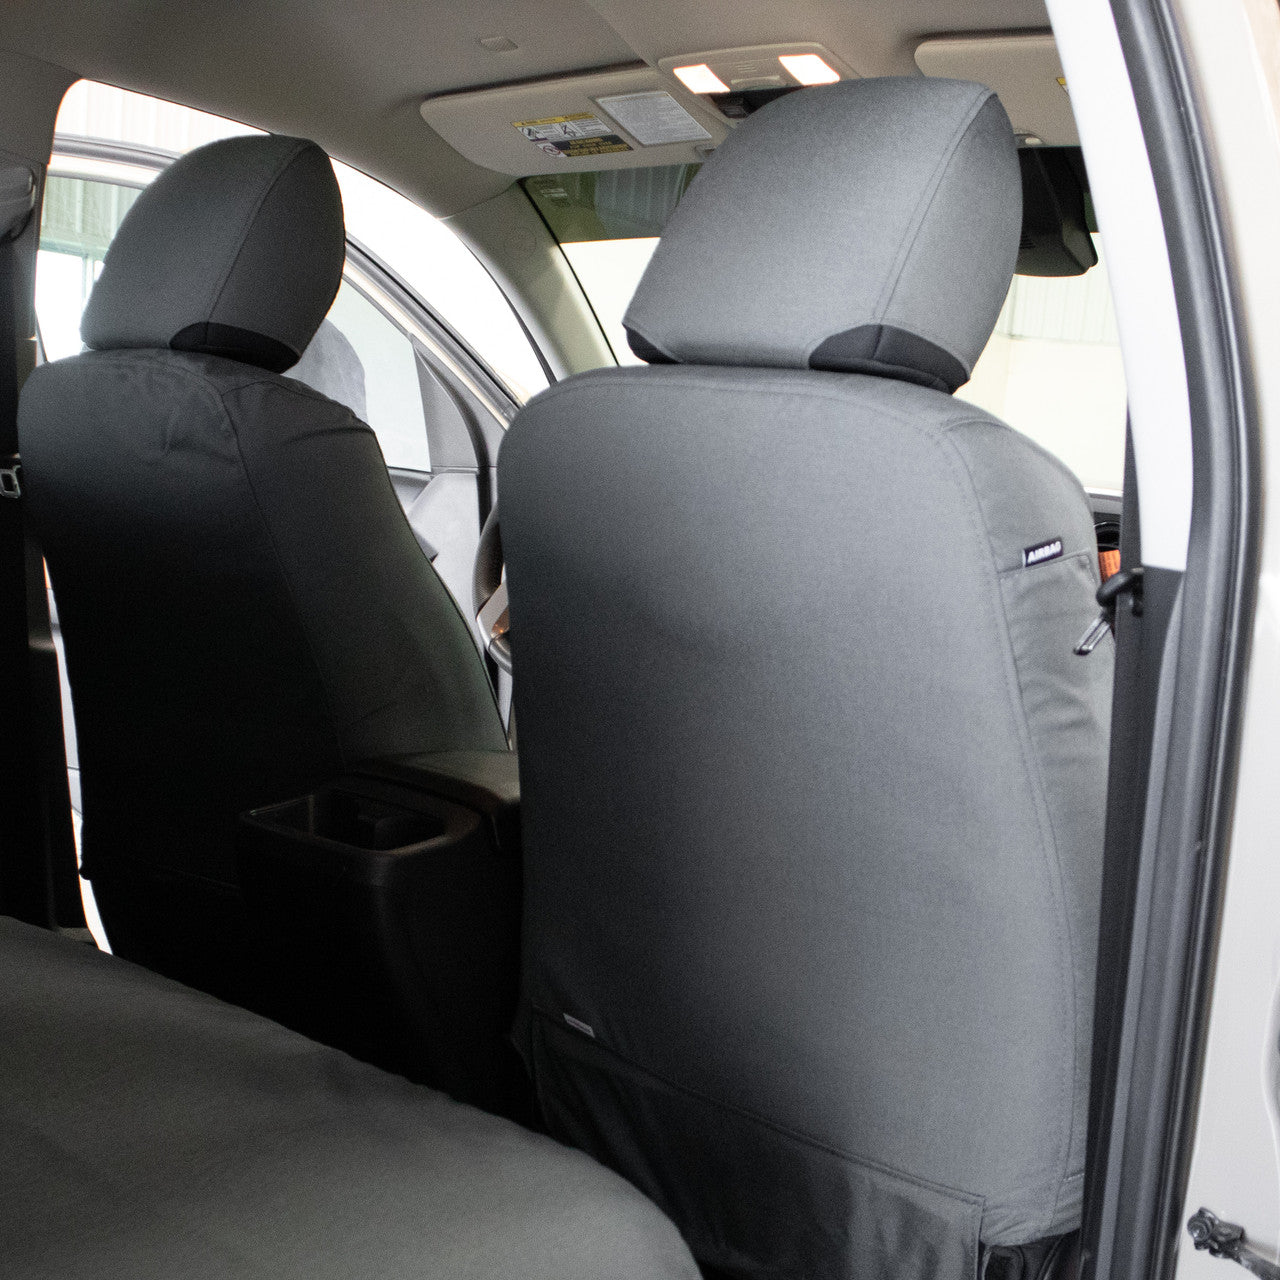 TigerTough Gray Seat Covers on a Toyota Tacoma Back of Front Seats